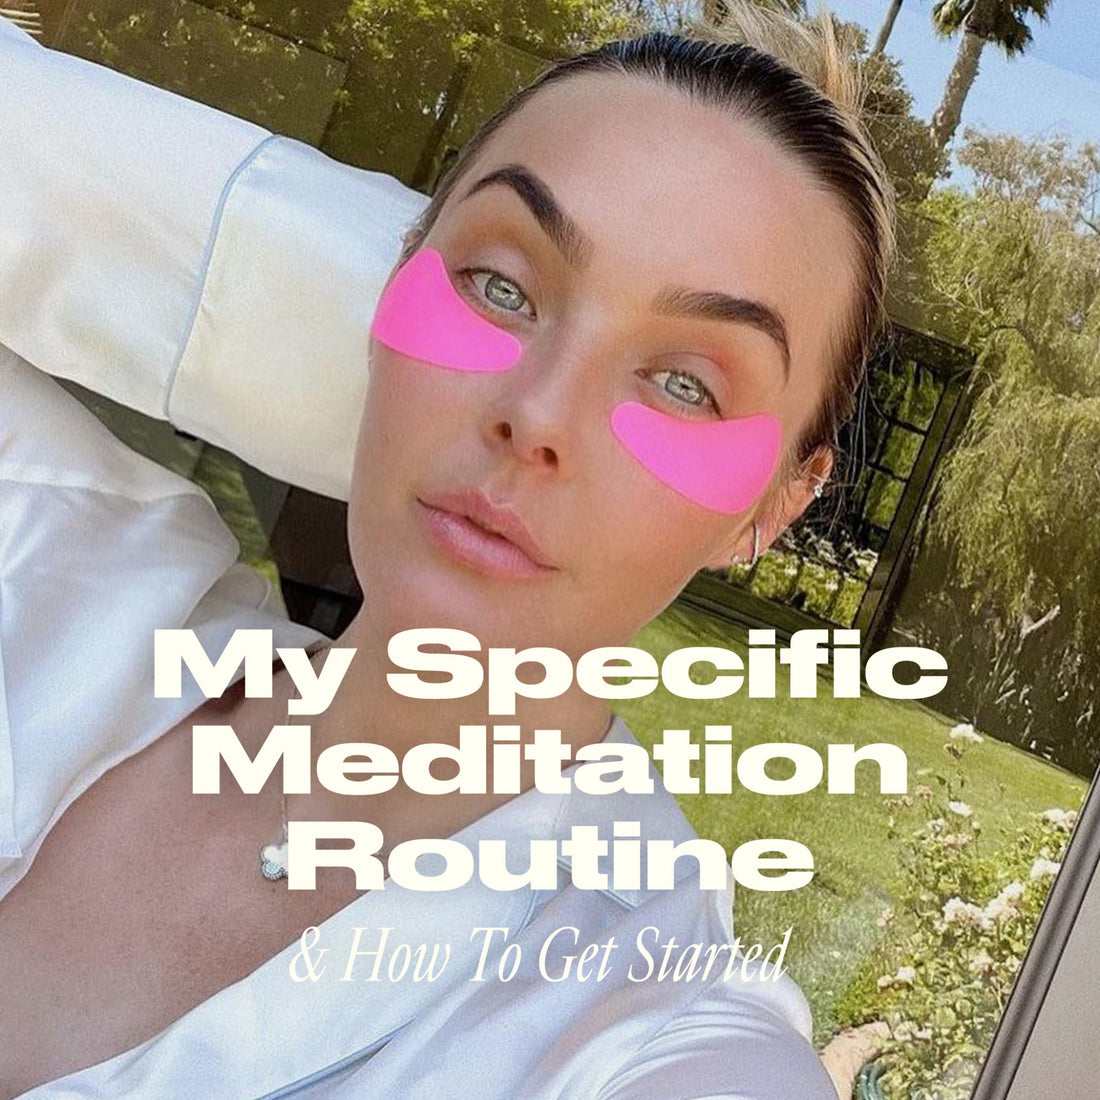 My Specific Meditation Routine & How To Get Started